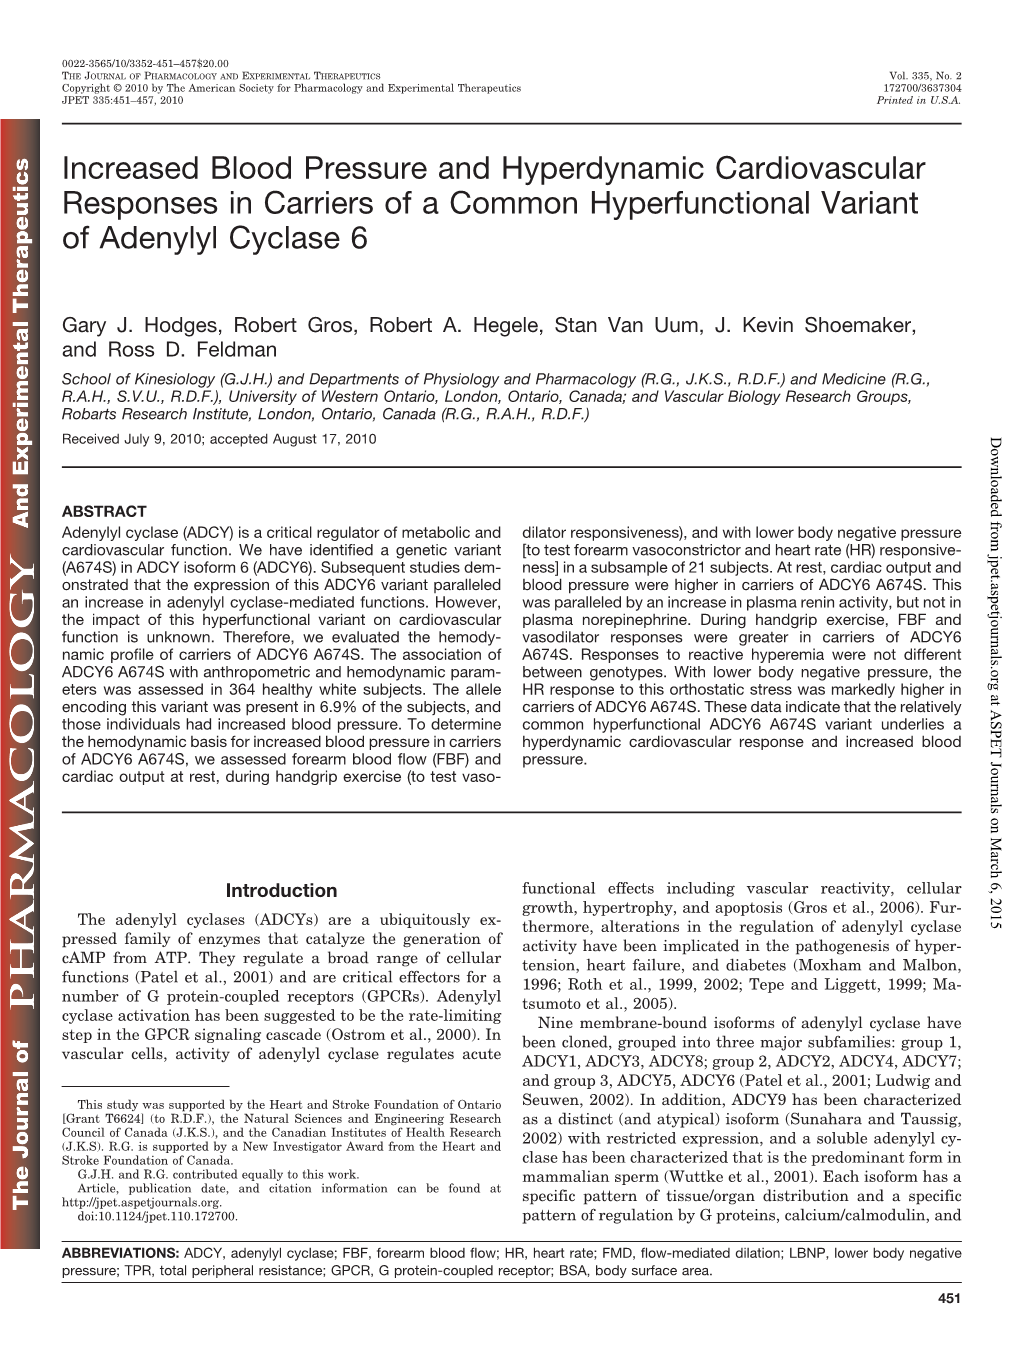 Increased Blood Pressure and Hyperdynamic Cardiovascular Responses in Carriers of a Common Hyperfunctional Variant of Adenylyl Cyclase 6